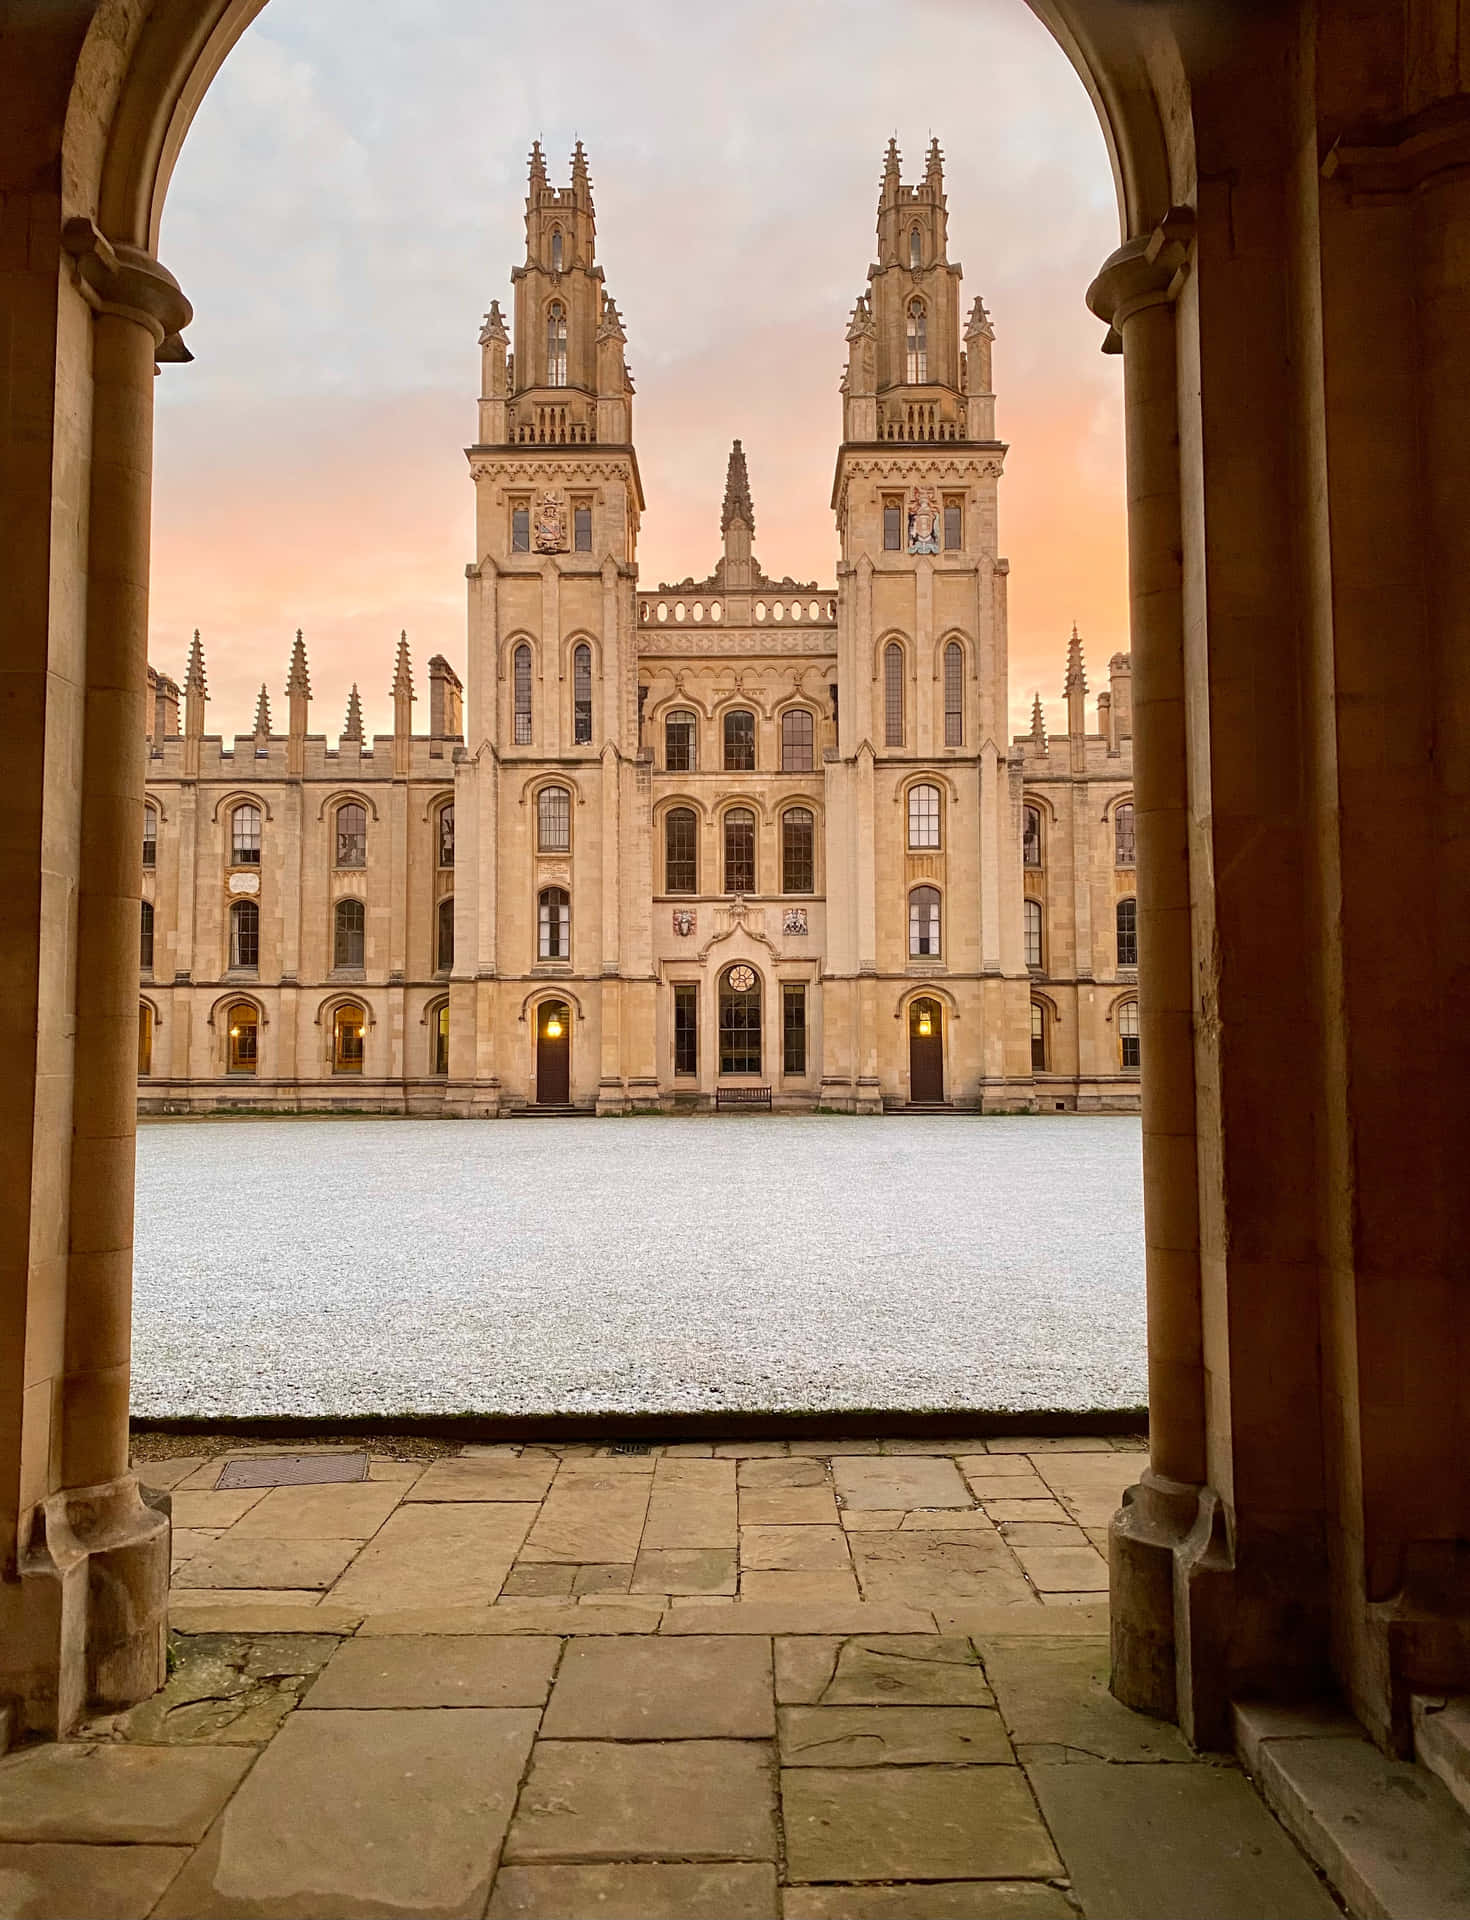 Caption: Stunning Architecture of All Souls College, Oxford University Wallpaper